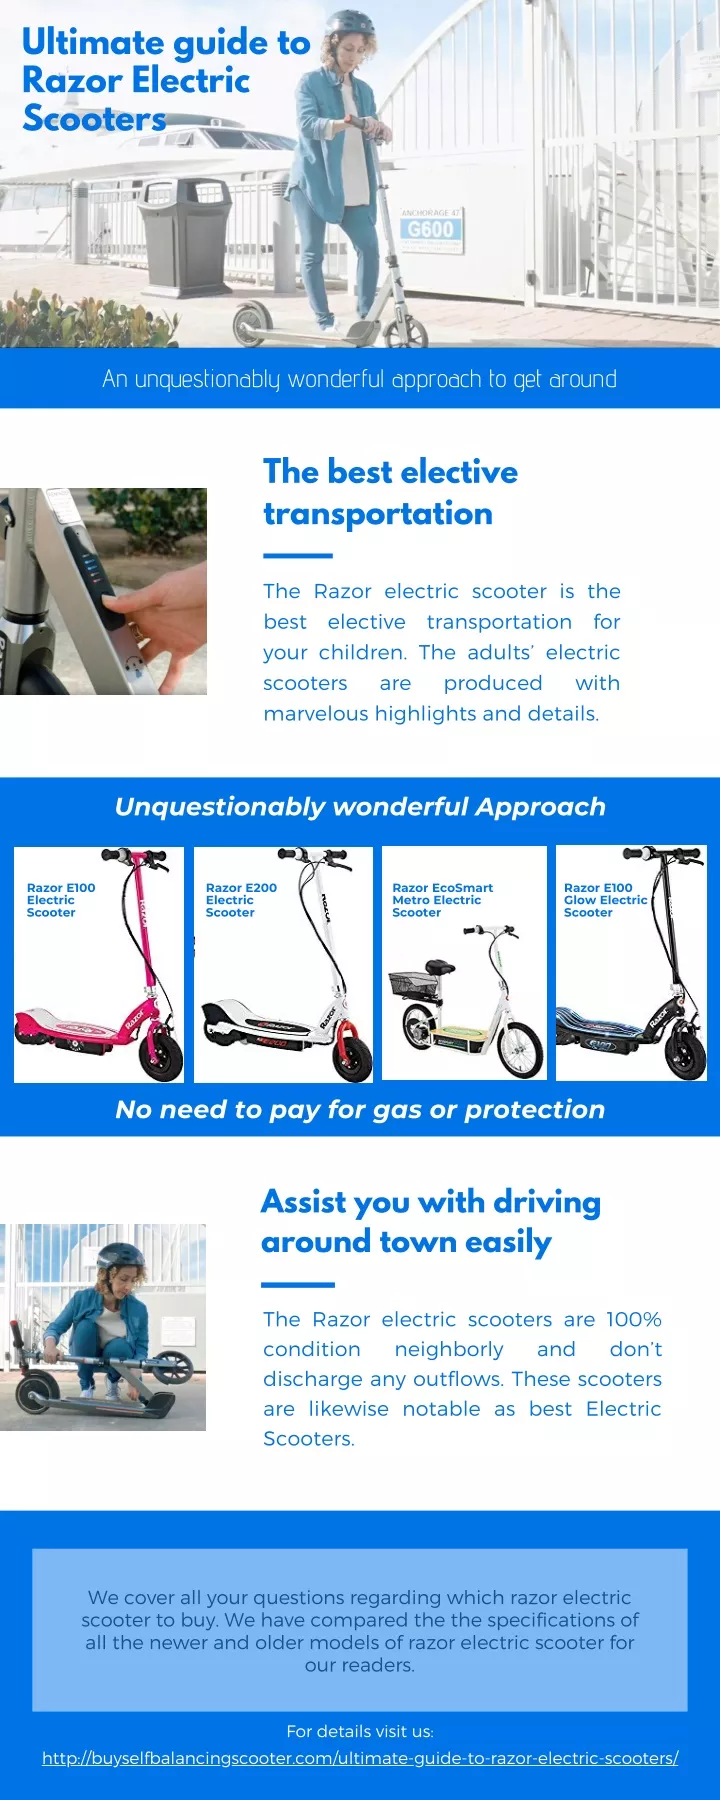 ultimate guide to razor electric scooters